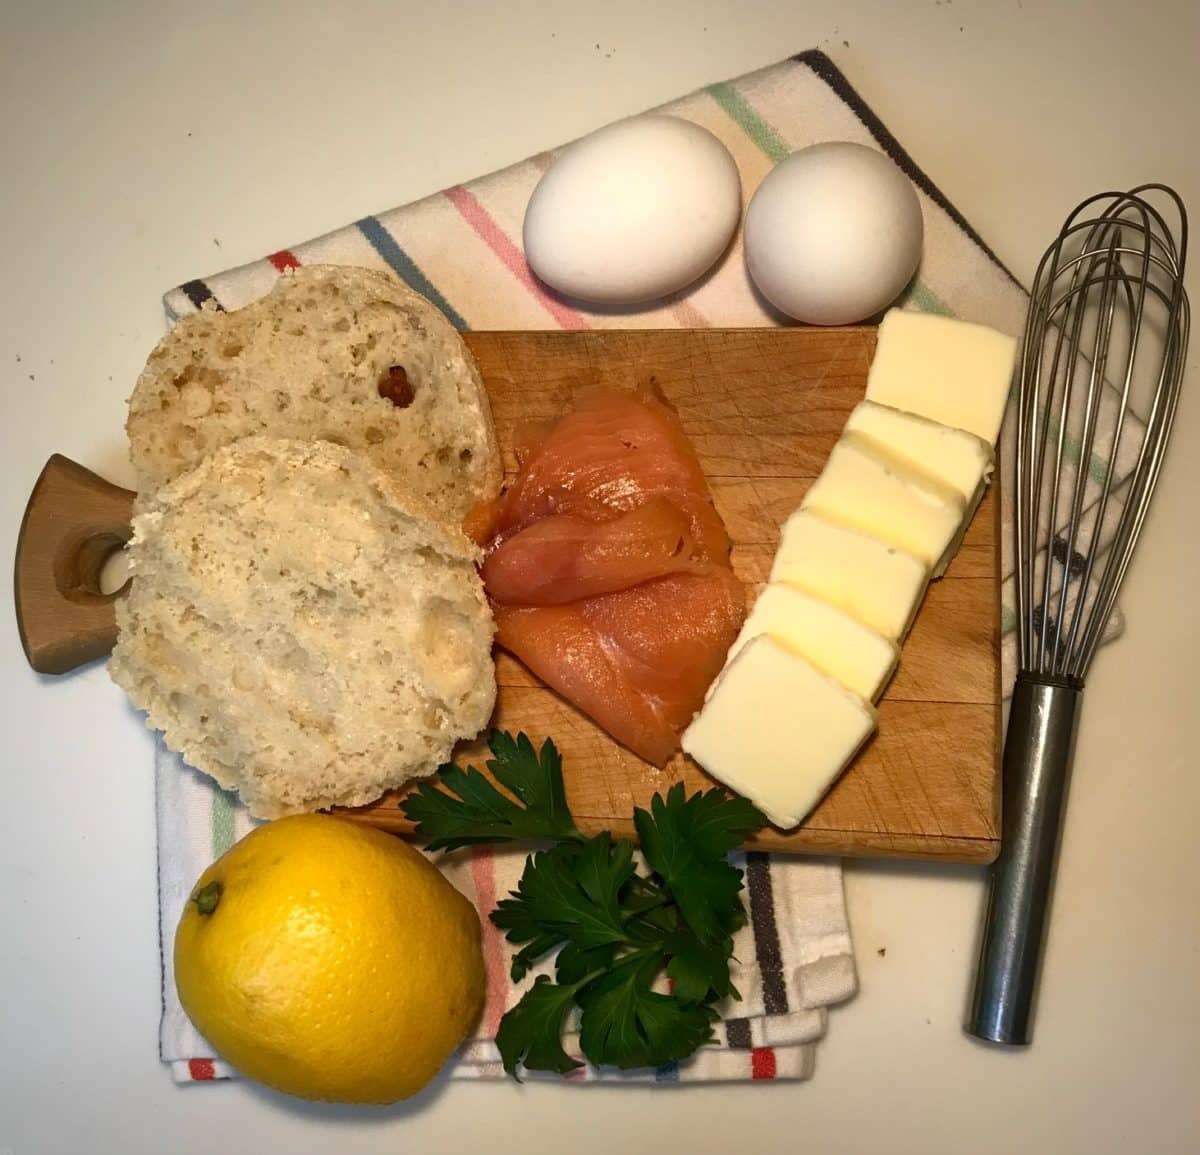 https://thecookscook.com/wp-content/uploads/eggs-royale-preparation-ingredients.jpg